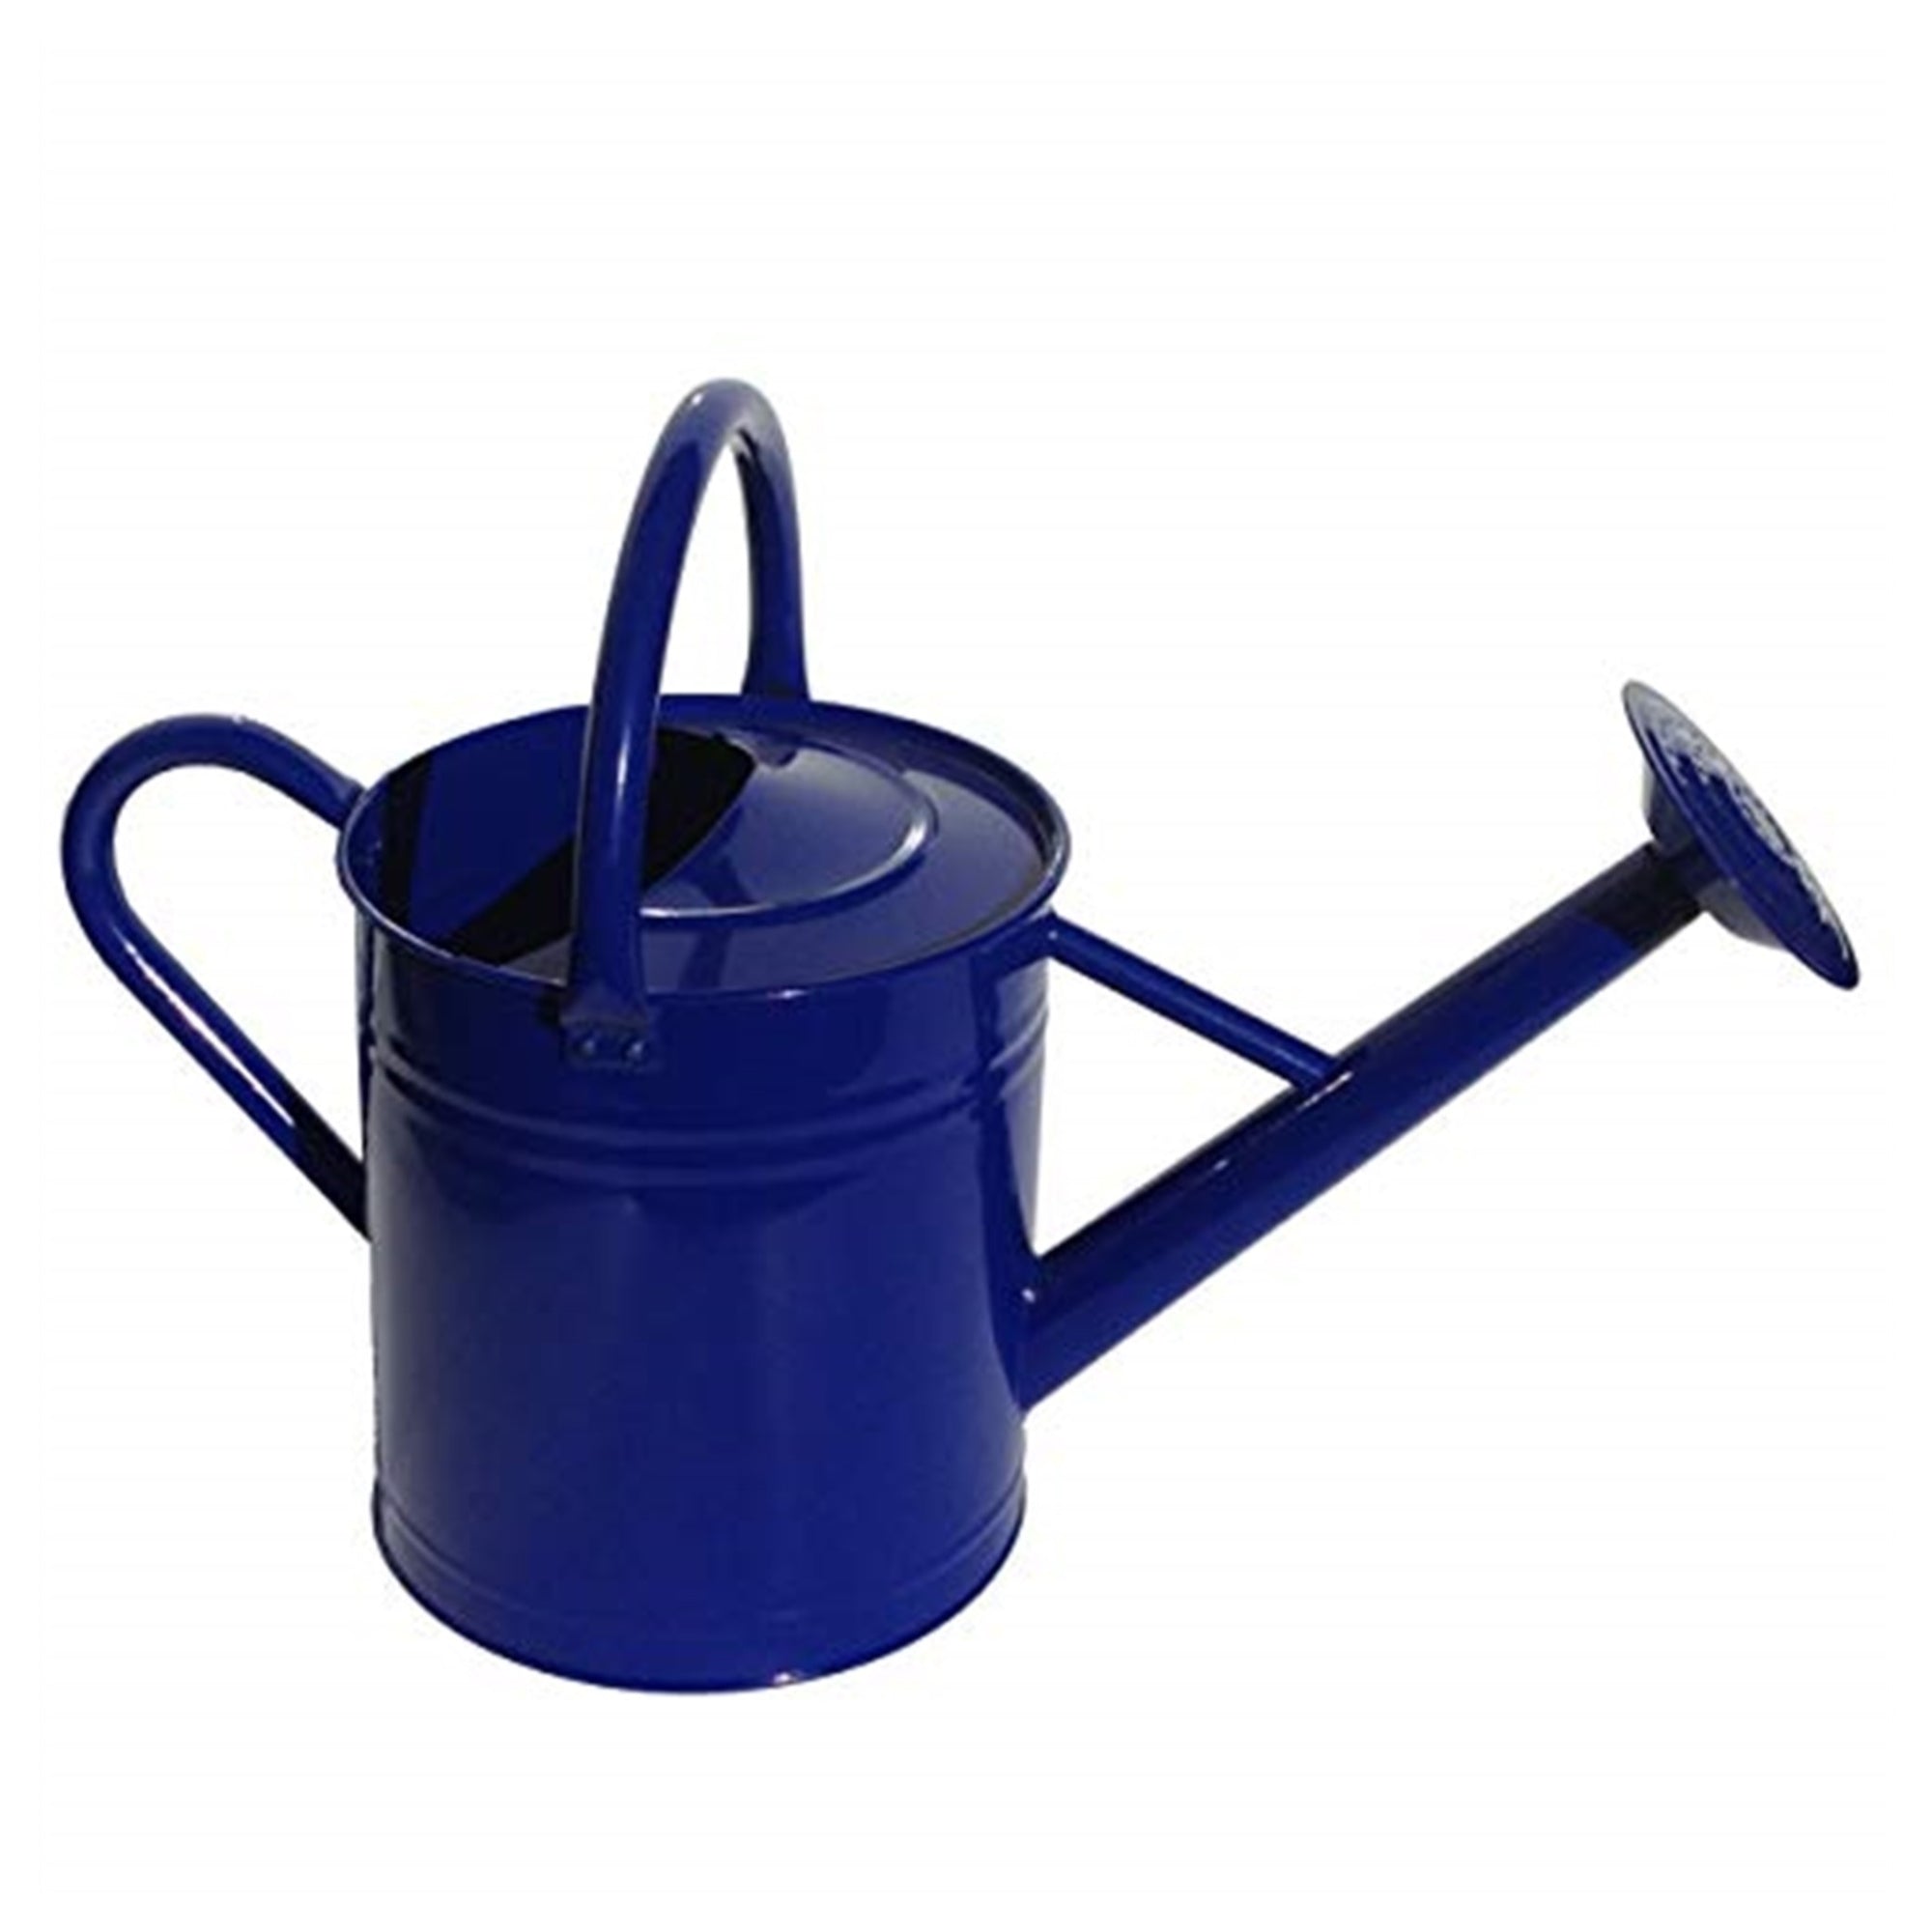 Gardener Select Blue Watering Can, 7L